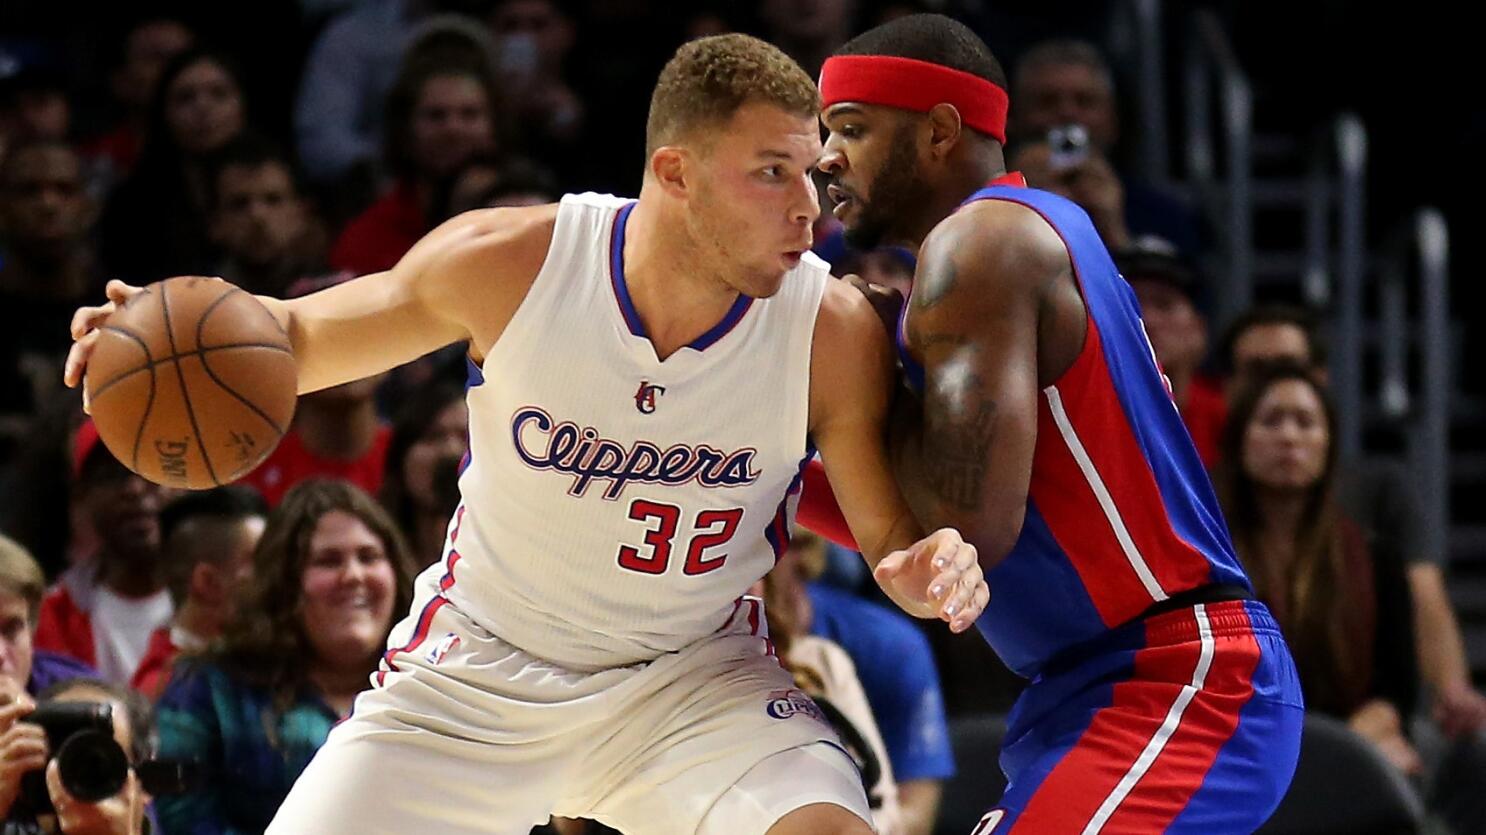 See Blake Griffin score his first points with the Pistons